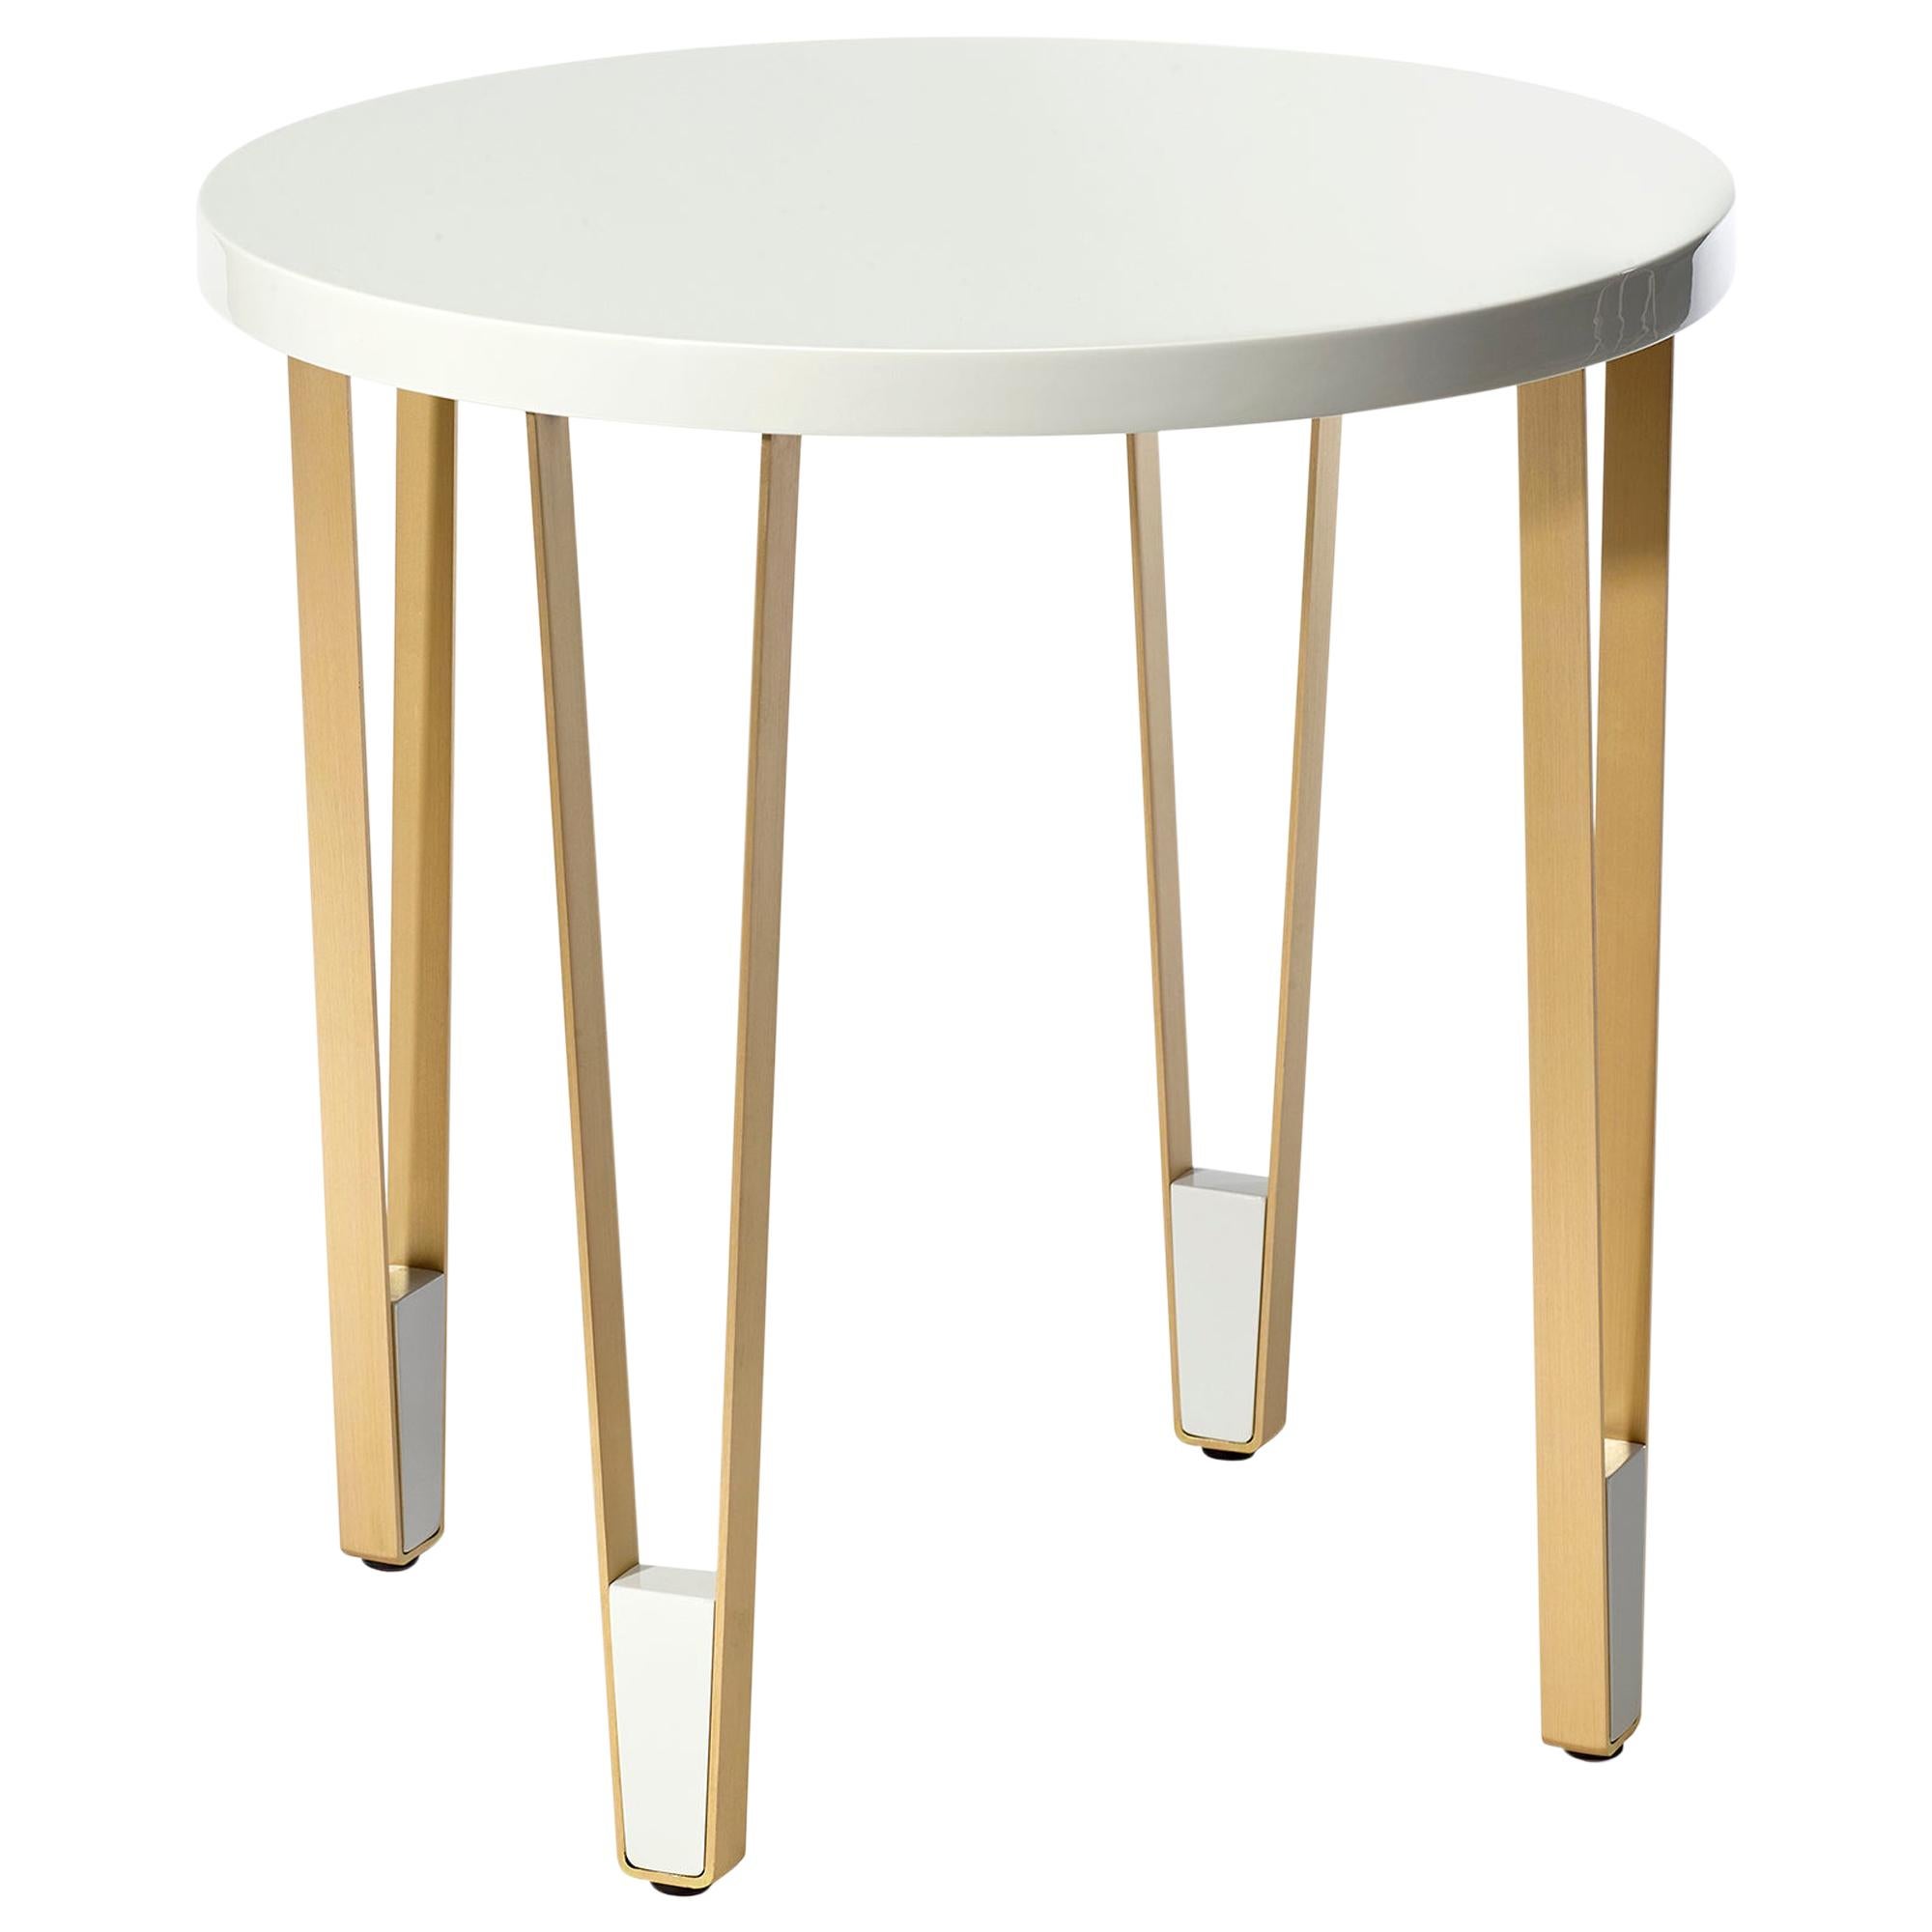 Ionic Round Side Table, White and Brass, InsidherLand by Joana Santos Barbosa